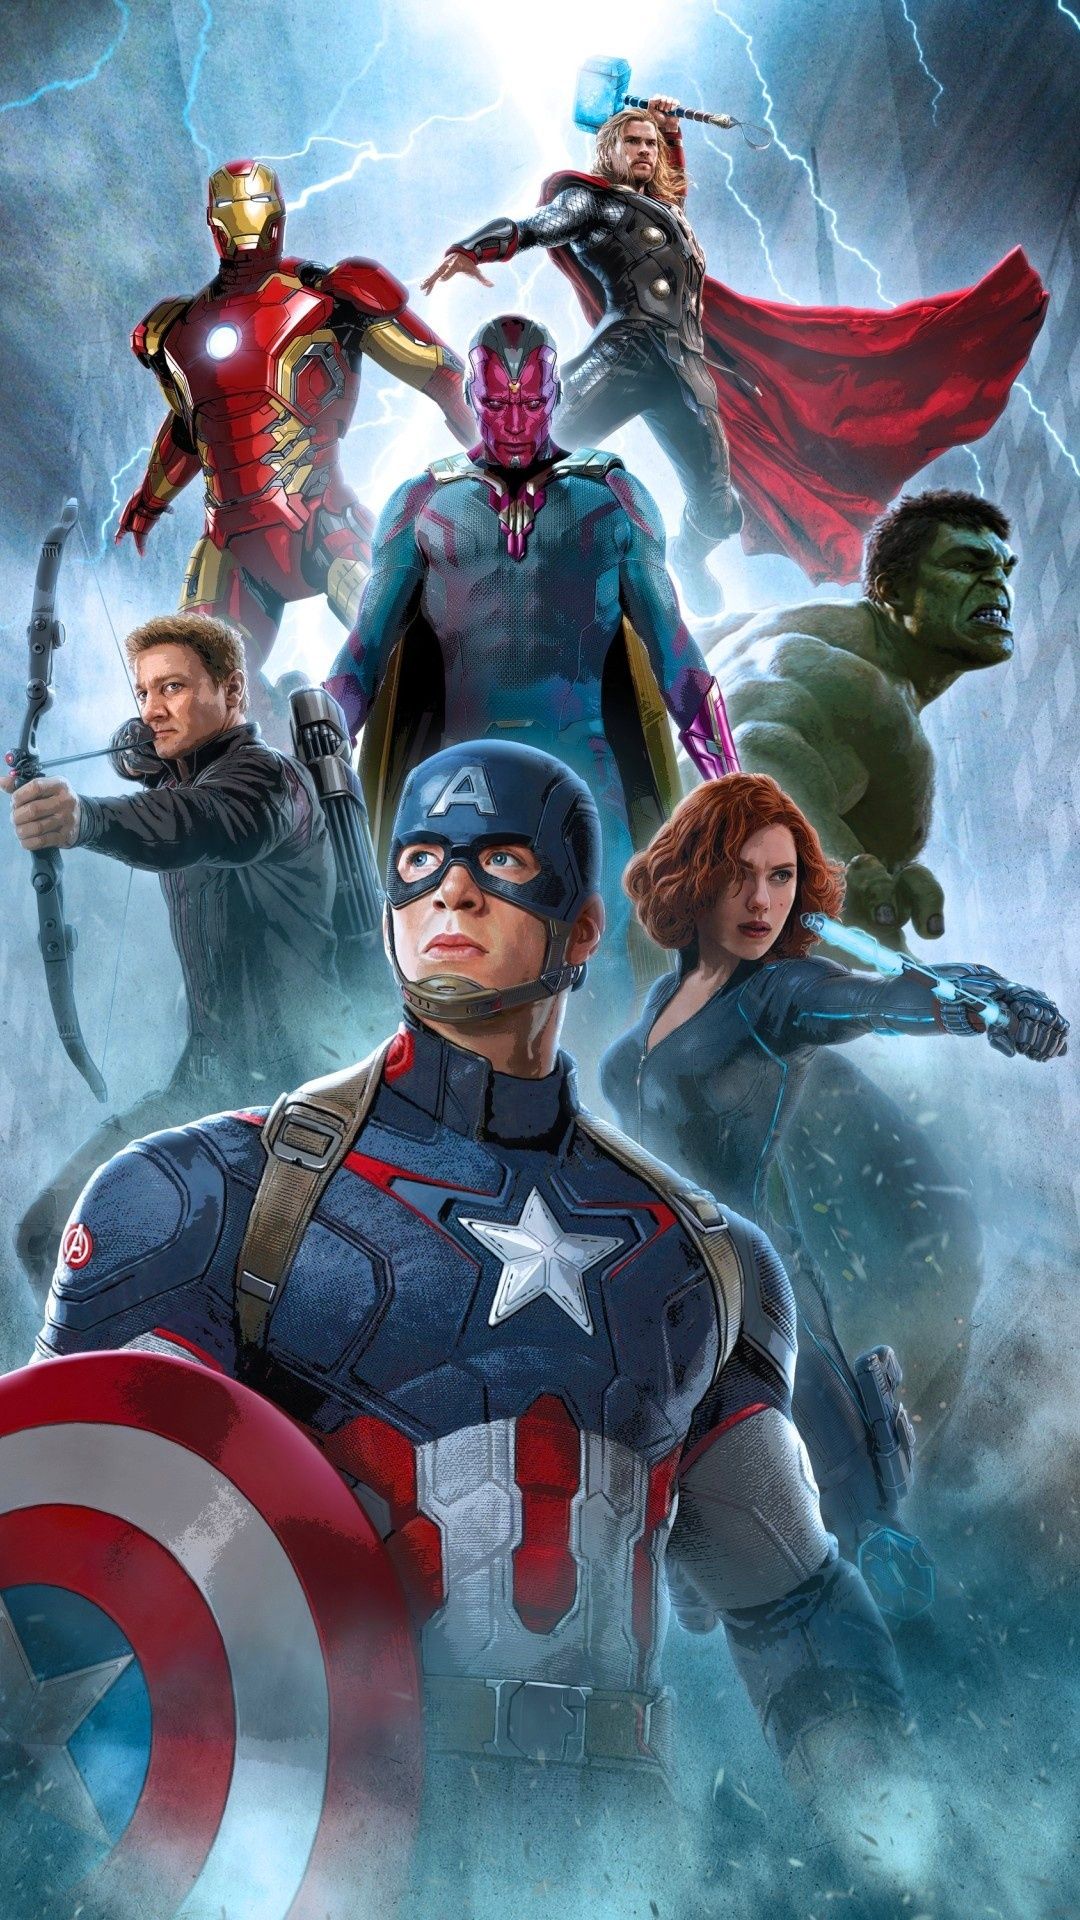 Avengers Android Wallpapers - Los mejores fondos gratuitos de Avengers Android